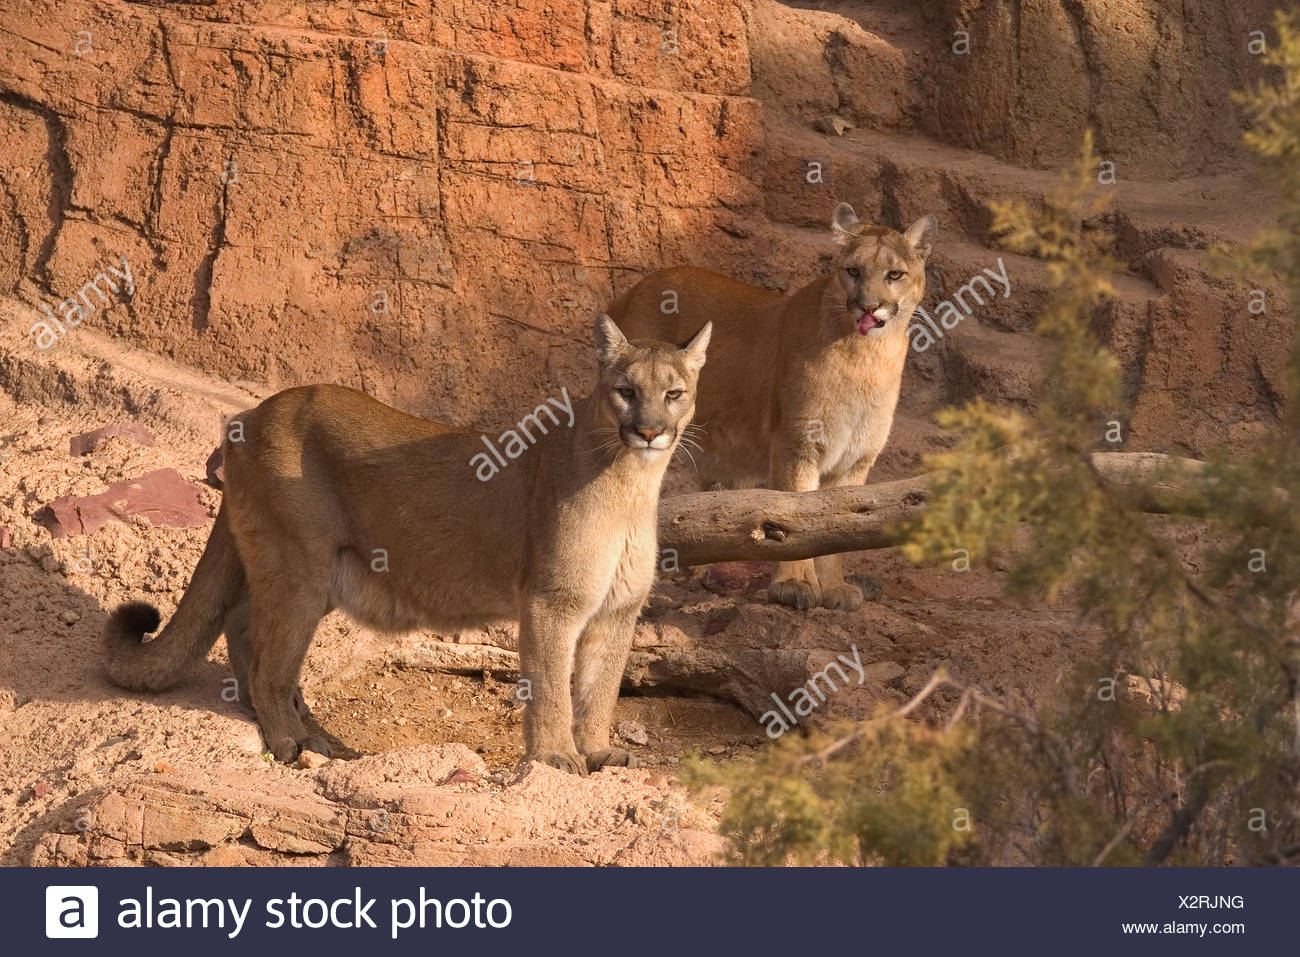 images of pumas